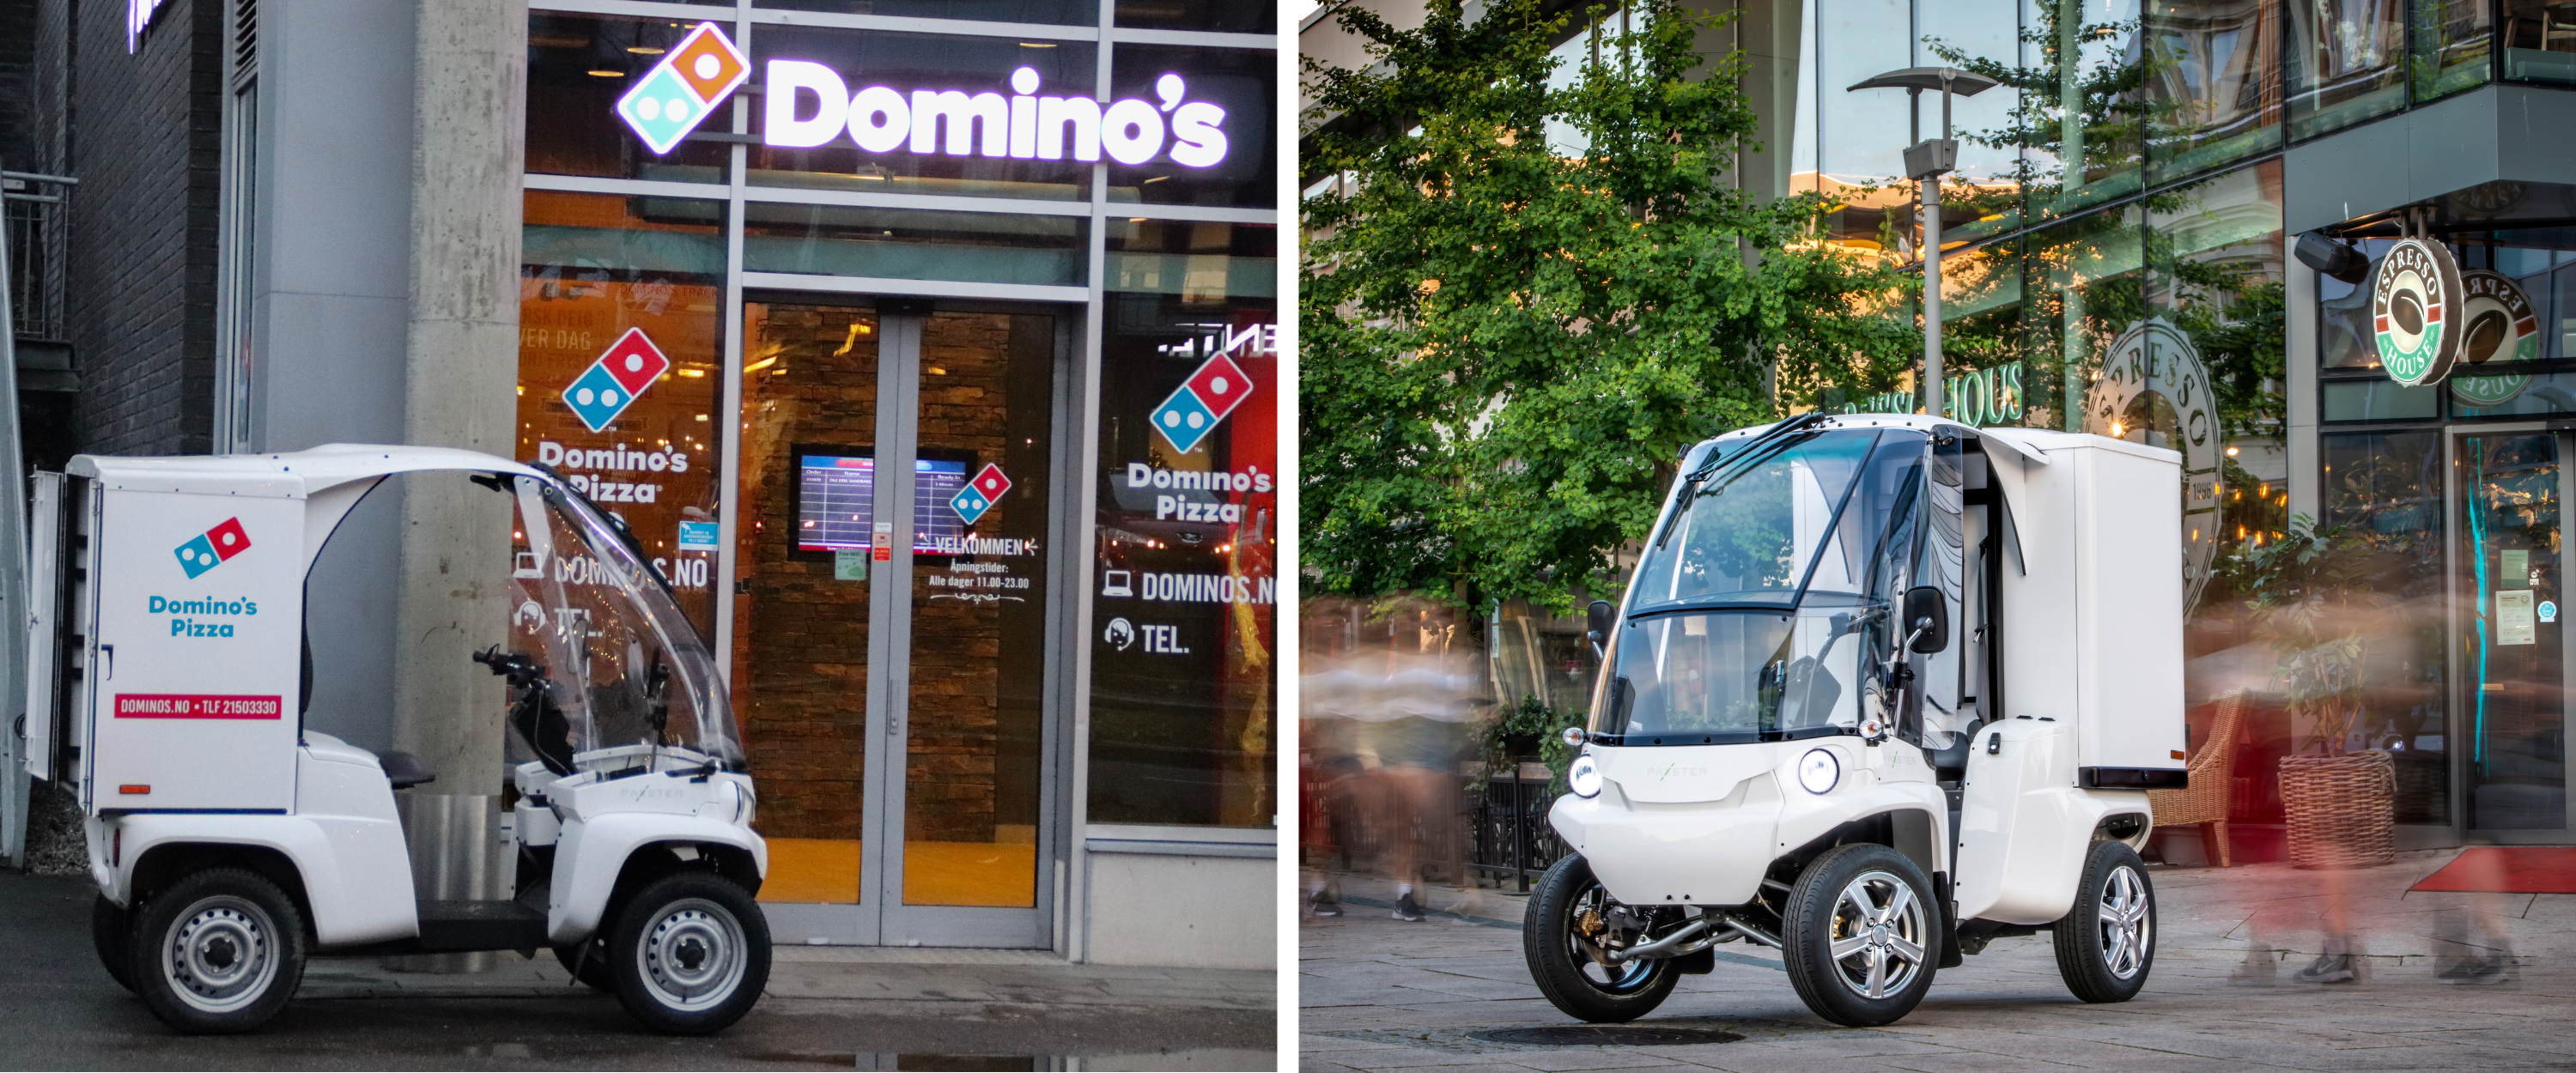 Paxster's electric vehicles power companies like Domino's